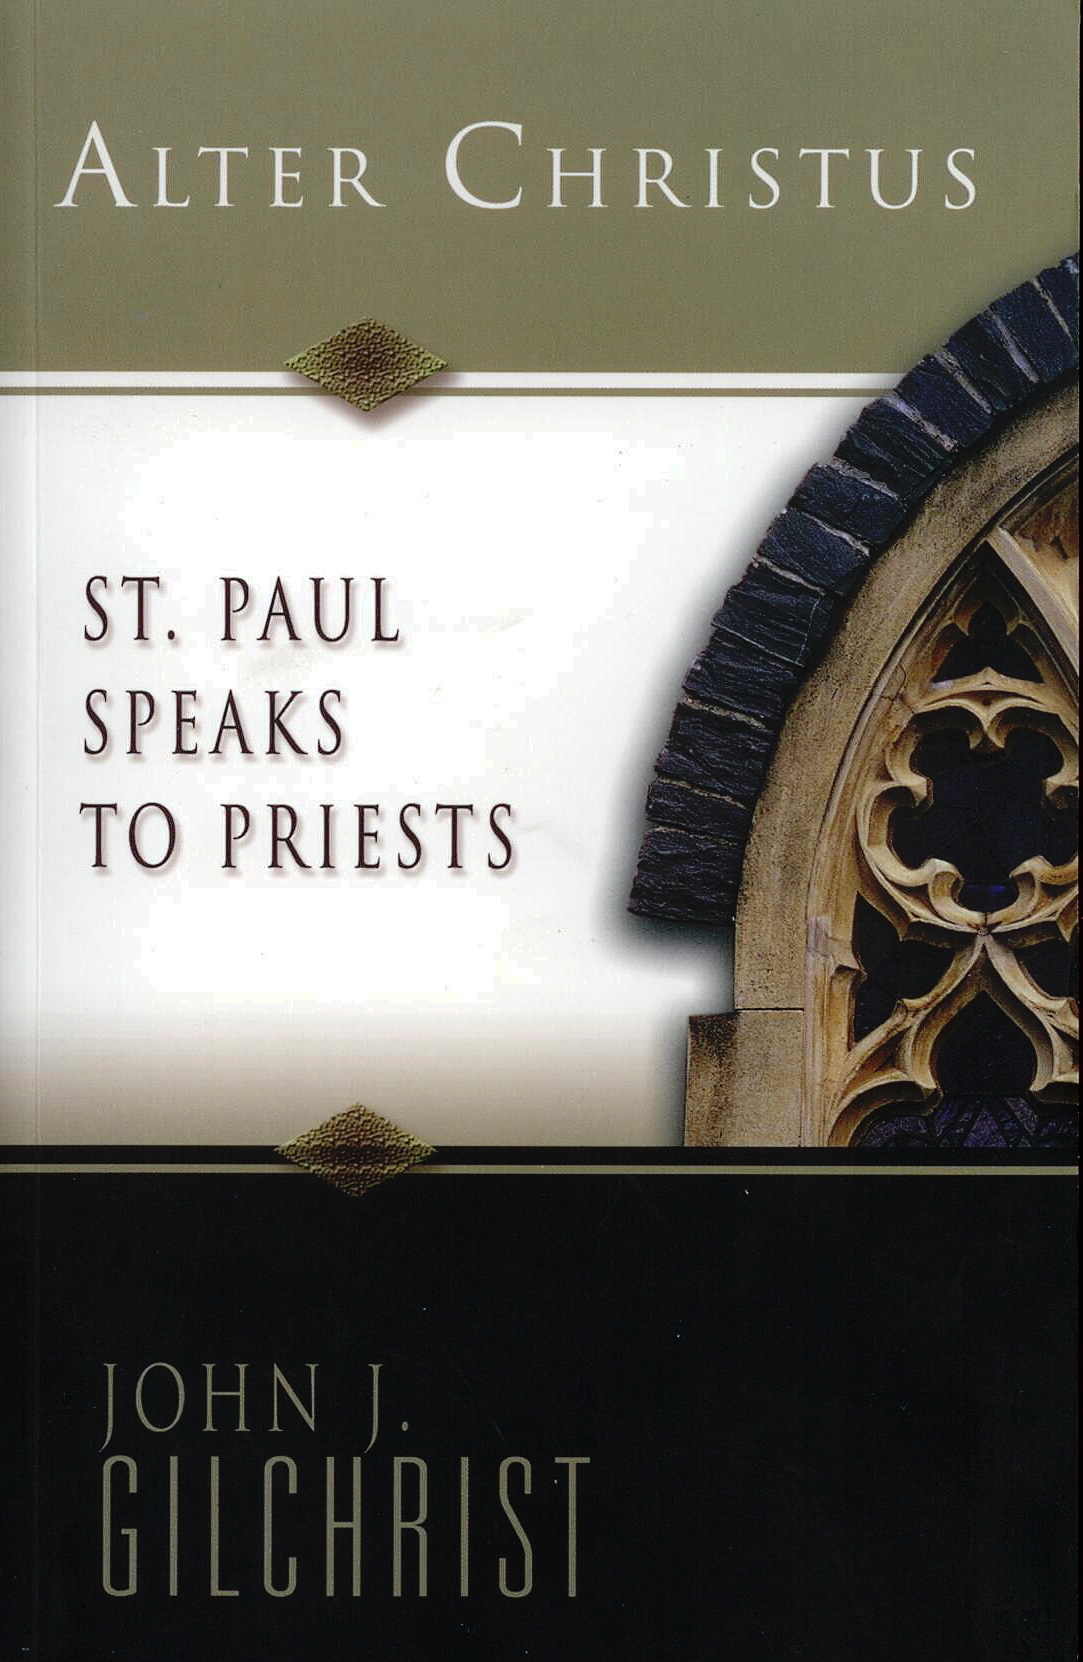 St. Paul Speaks To Priests by John J. Gilchrist